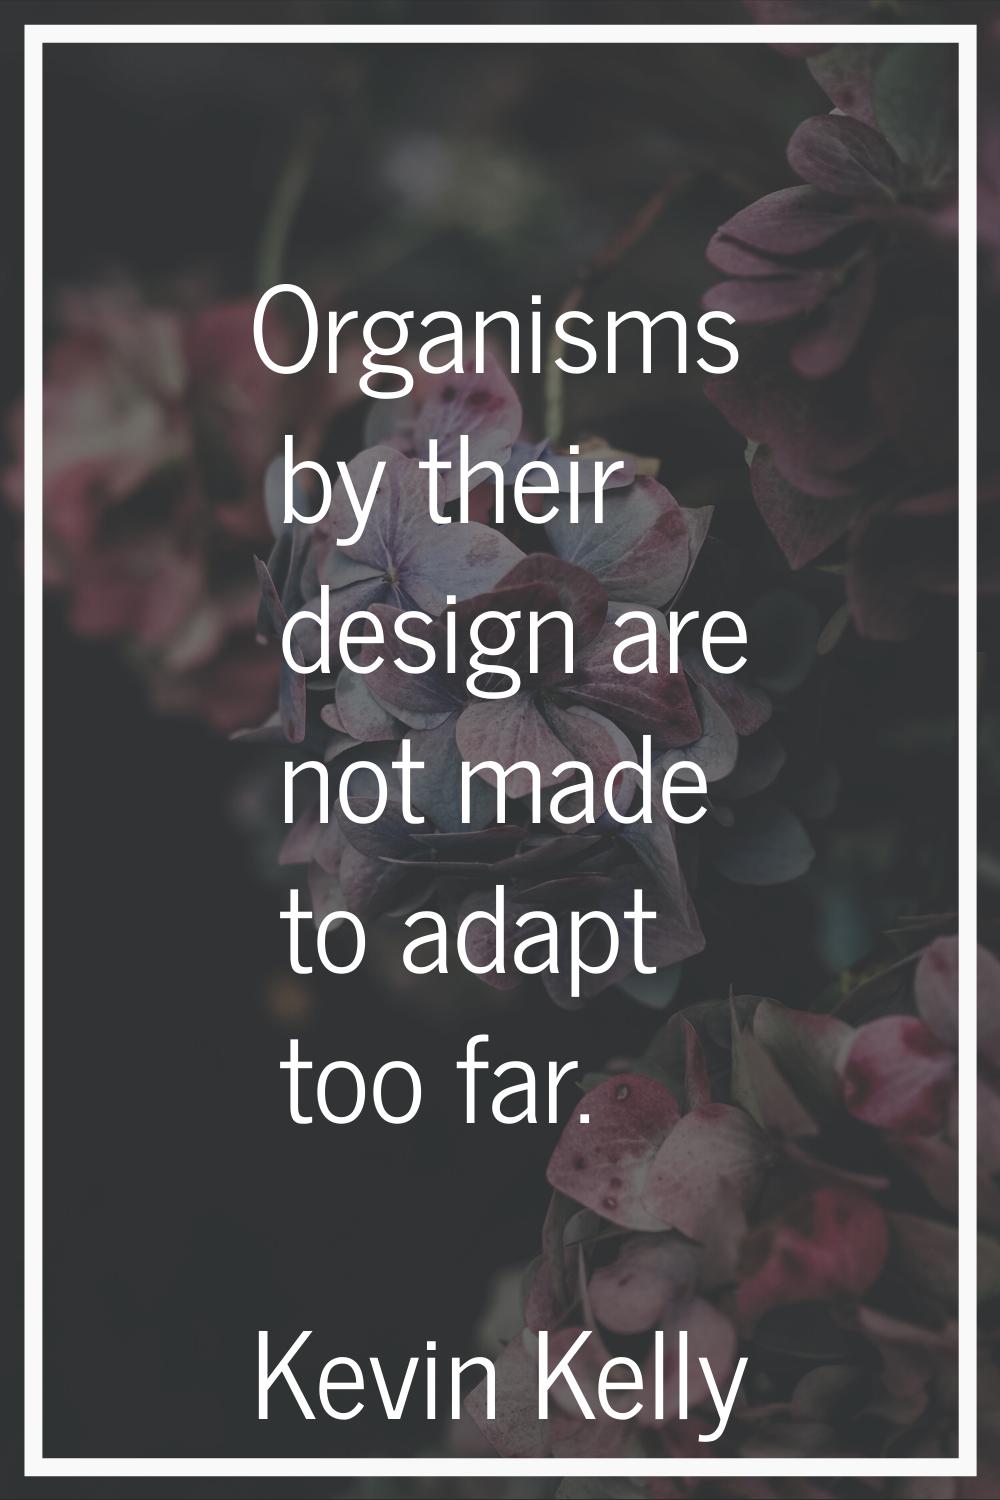 Organisms by their design are not made to adapt too far.